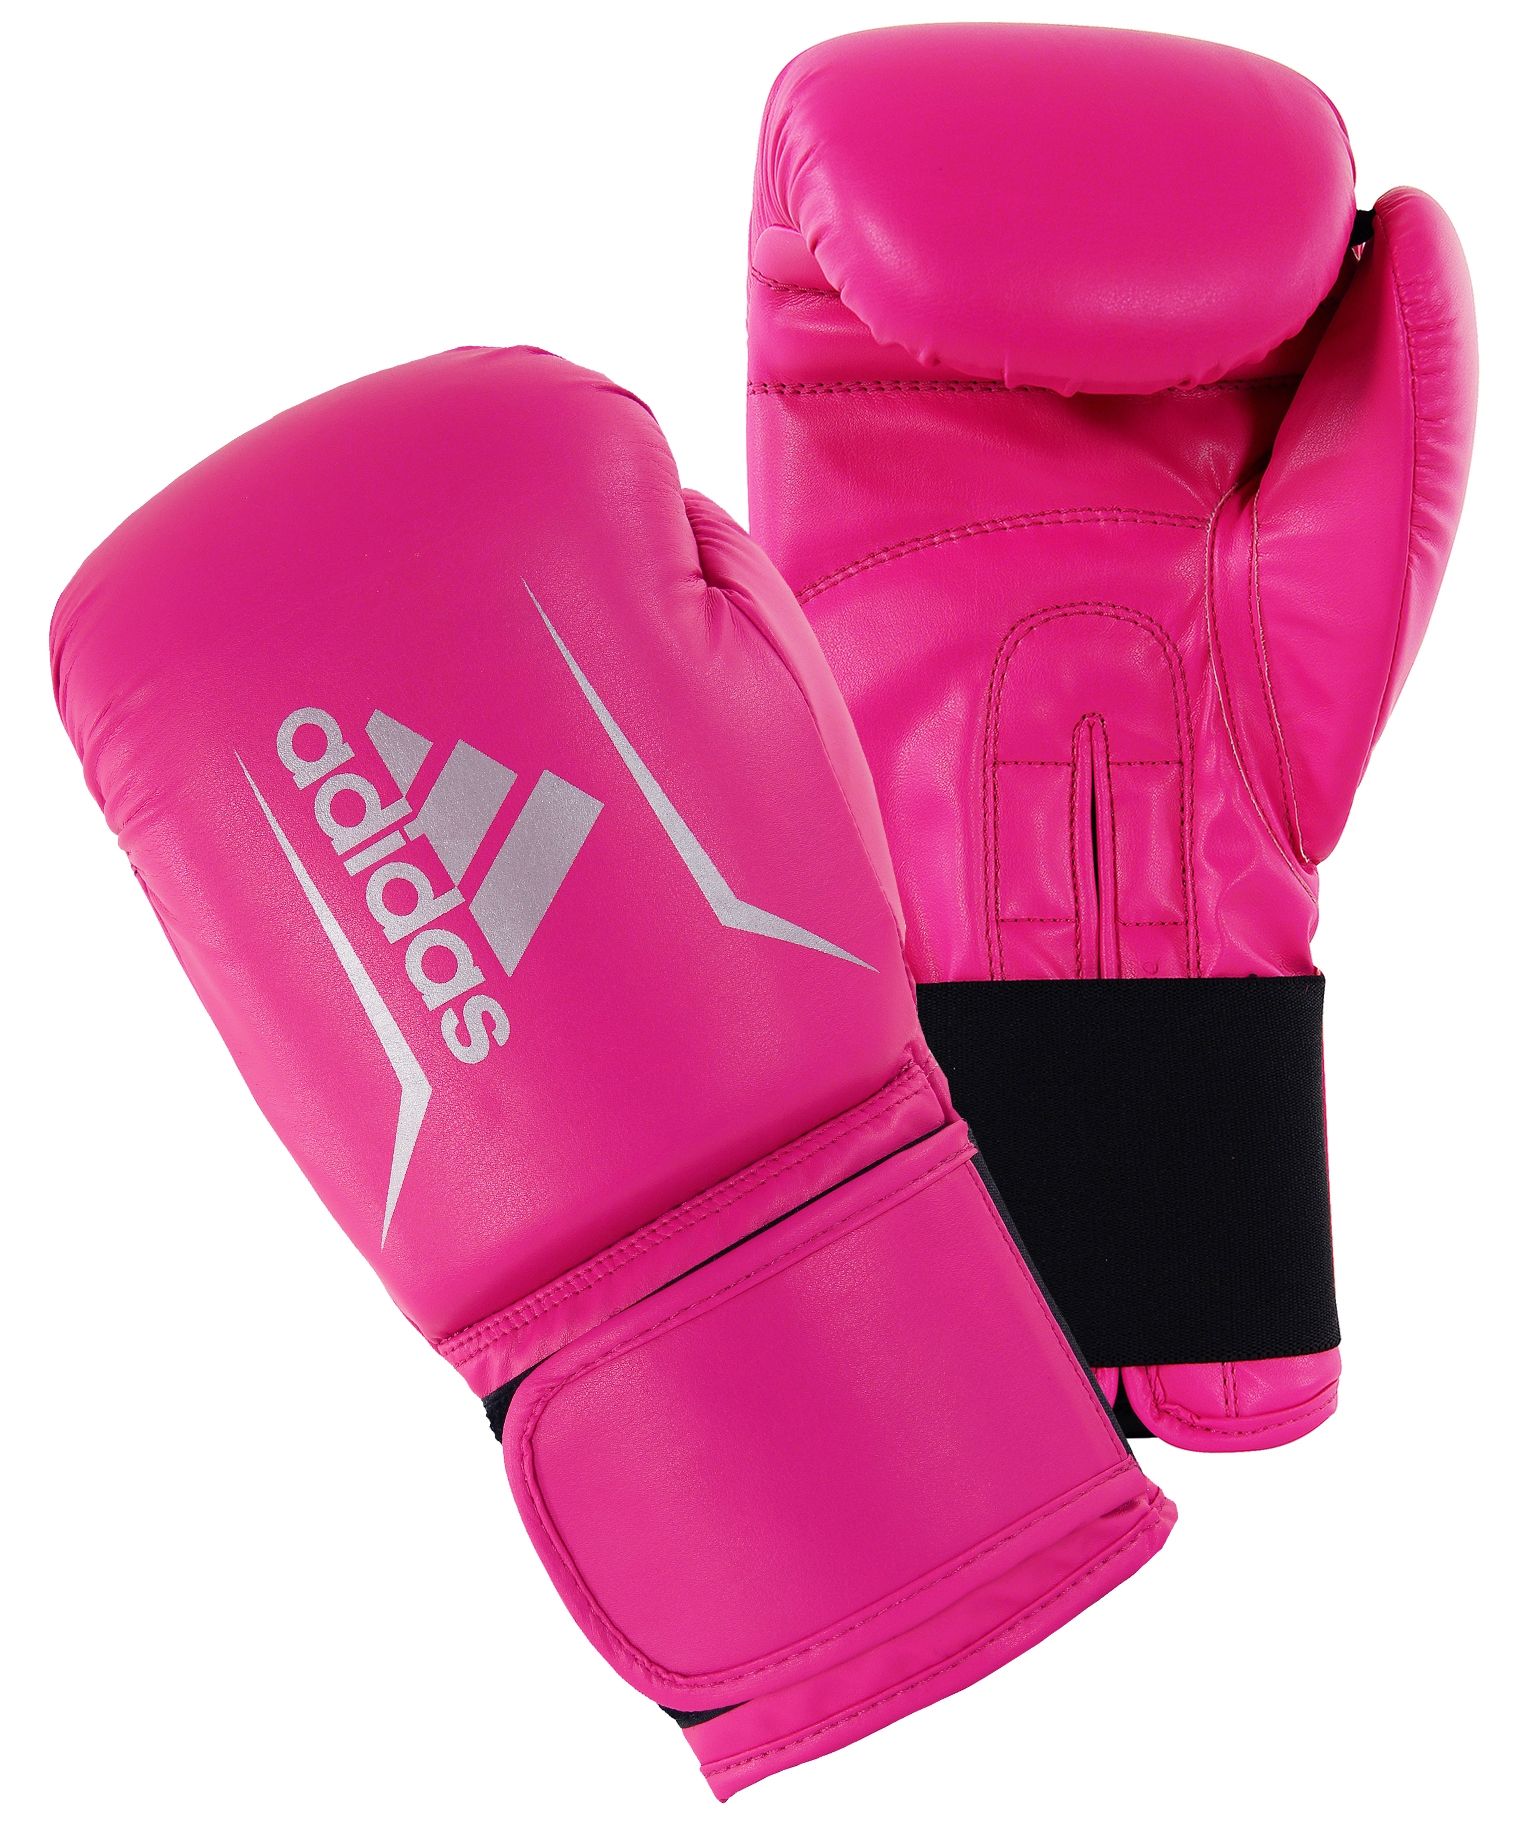 Women\'s Speed 50 Boxing Gloves adidas